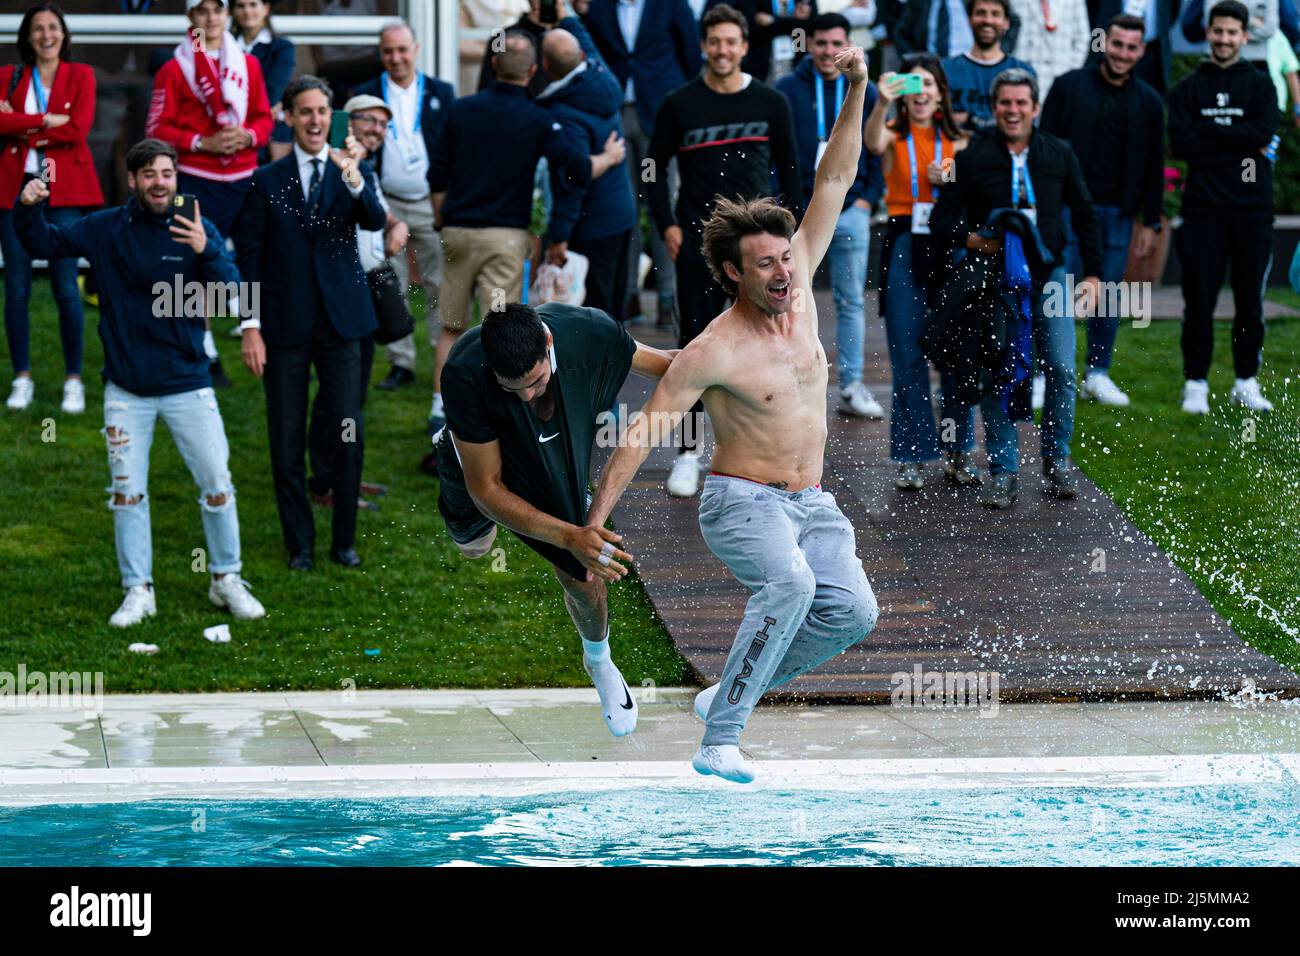 Barcelona, Spain. 24th Apr, 2022. Carlos Alcaraz of Spain jump into the  pool with his trainer Juan Carlos Ferrero of Spain after winning the  Barcelona Open Banc Sabadell tennis match at the